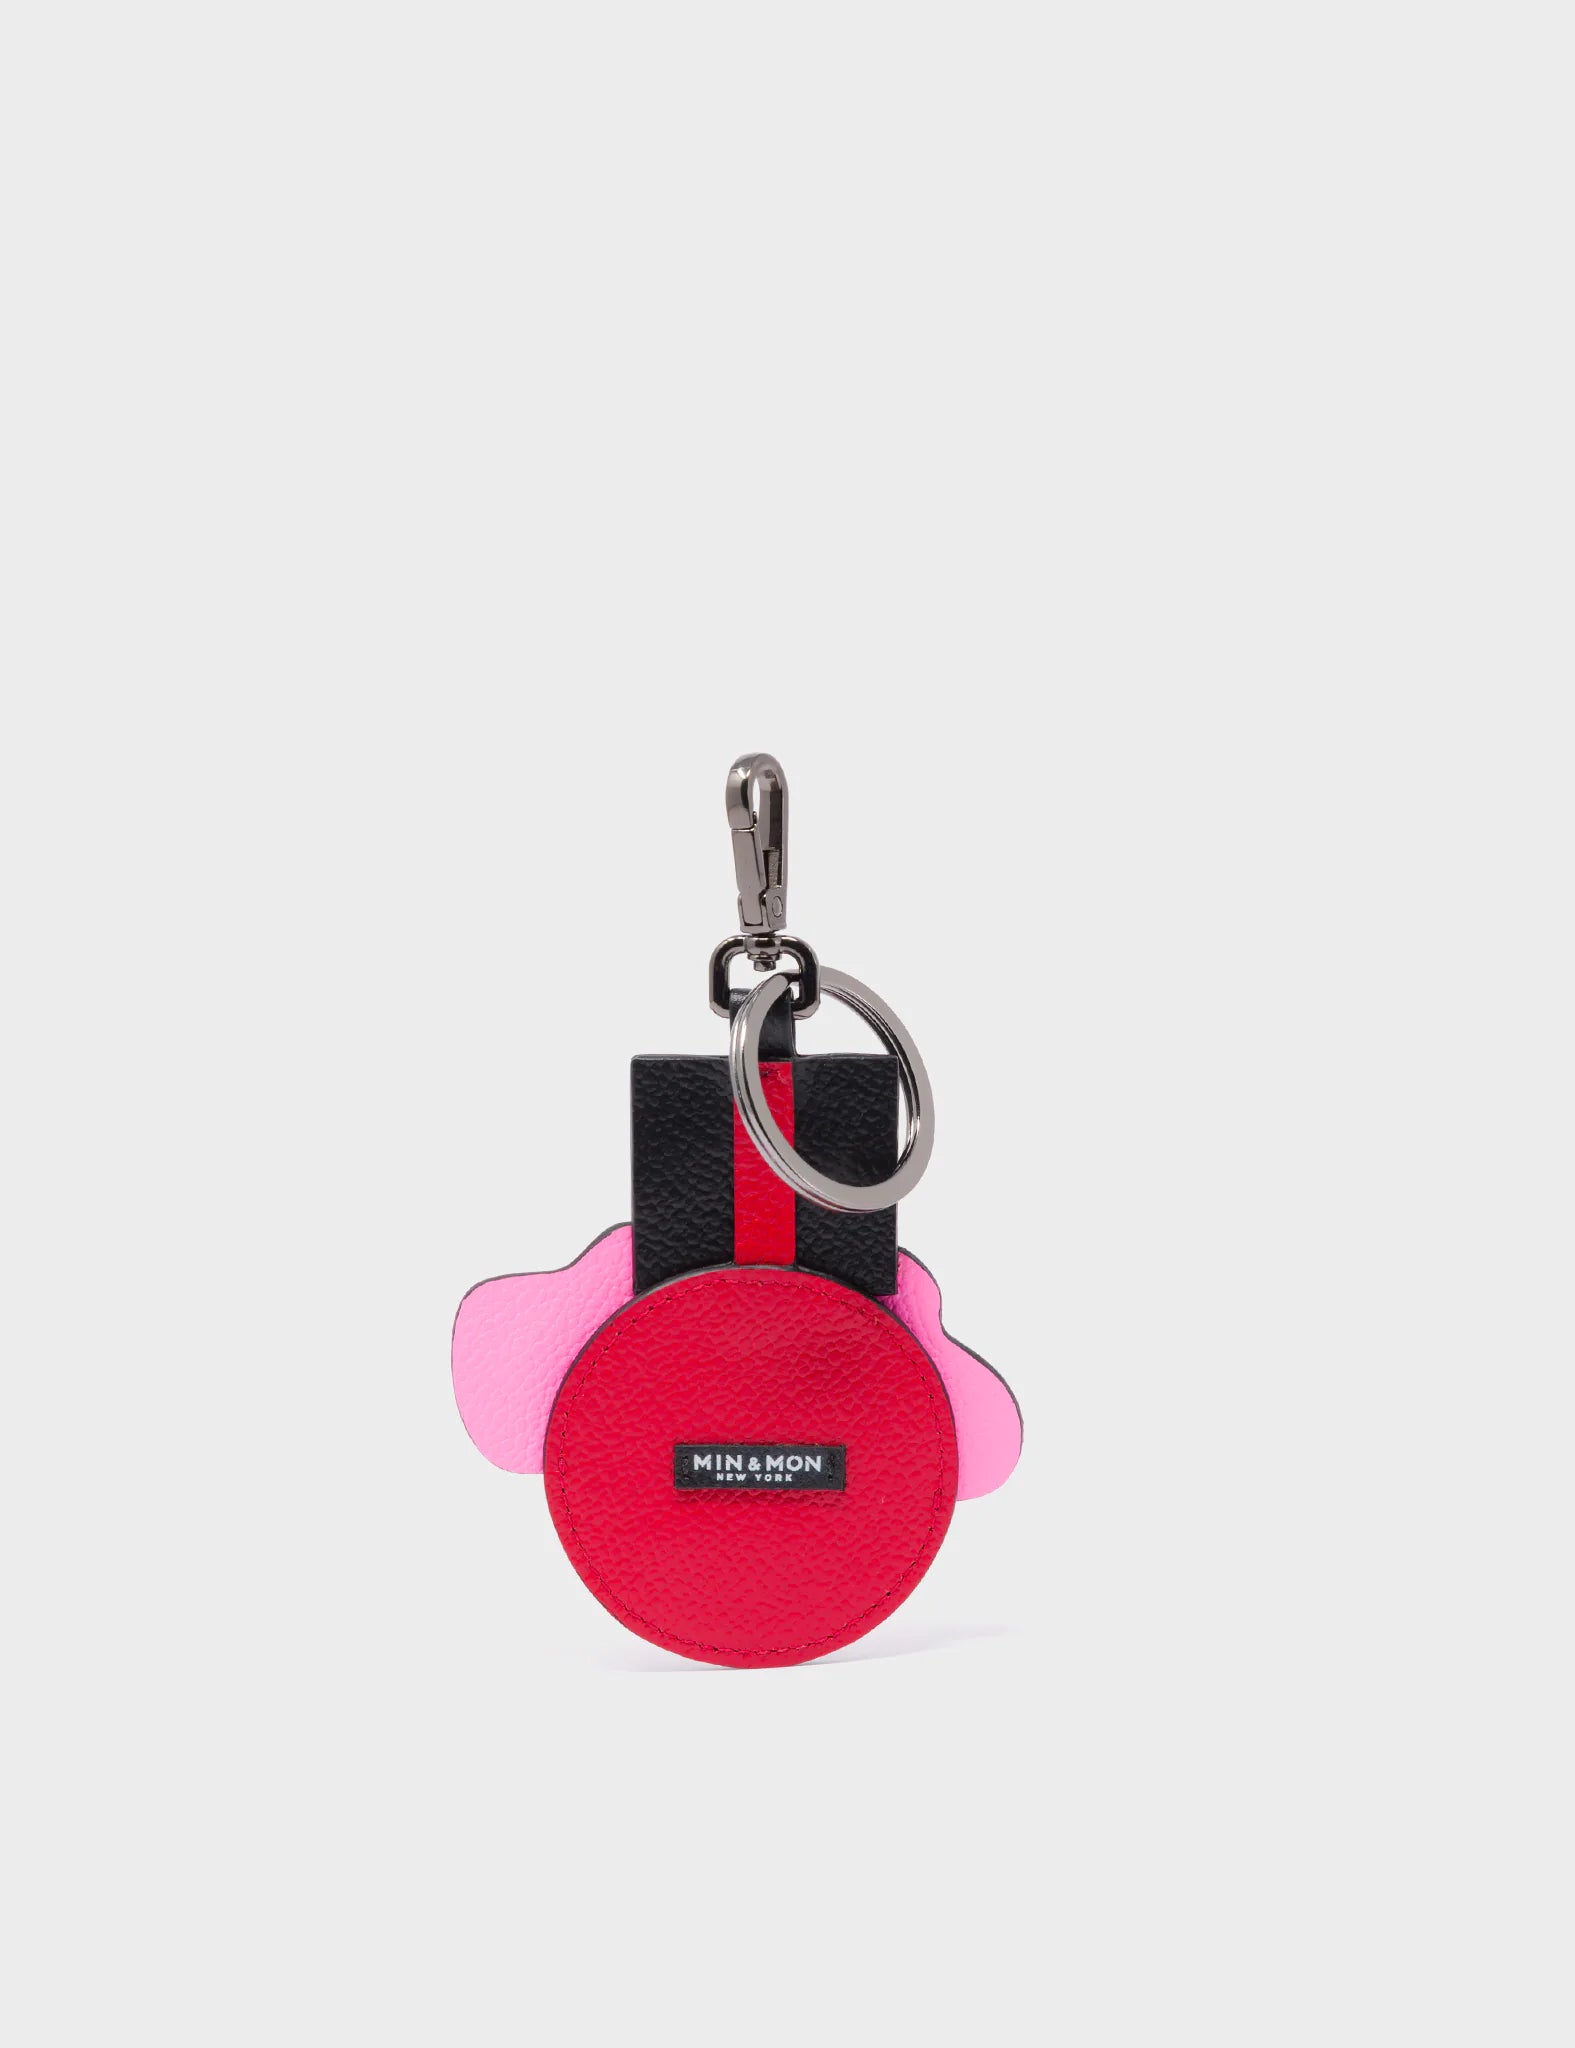 Cloud Hat Charm - Red and Bubblegum Pink Leather Keychain - Back View